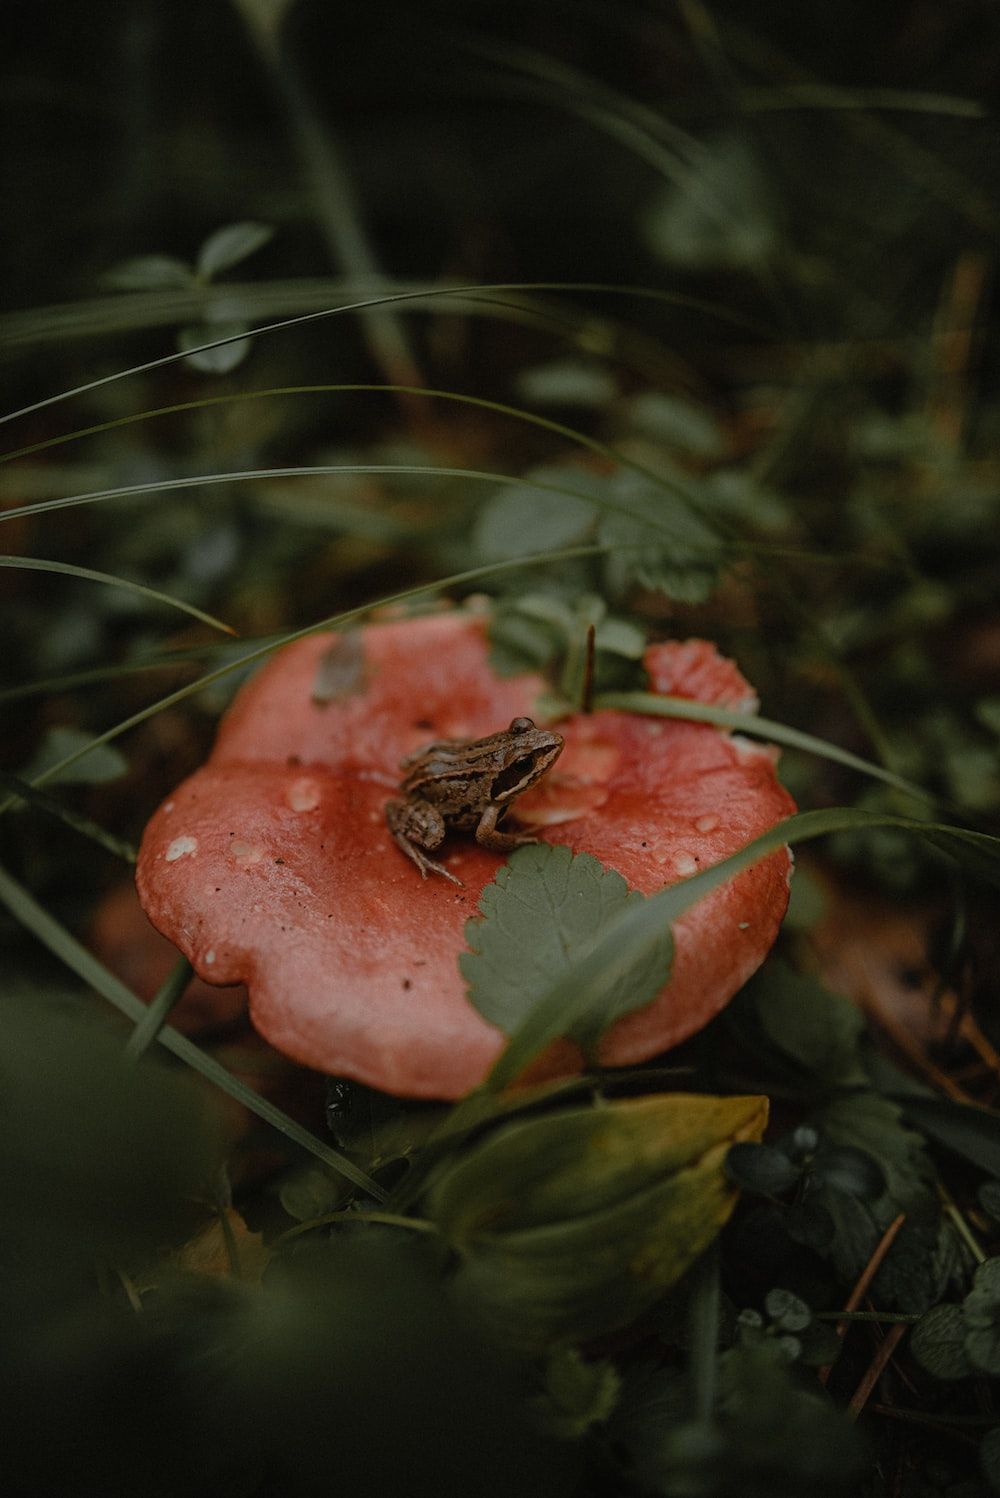 A frog sitting on top of a red mushroom photo